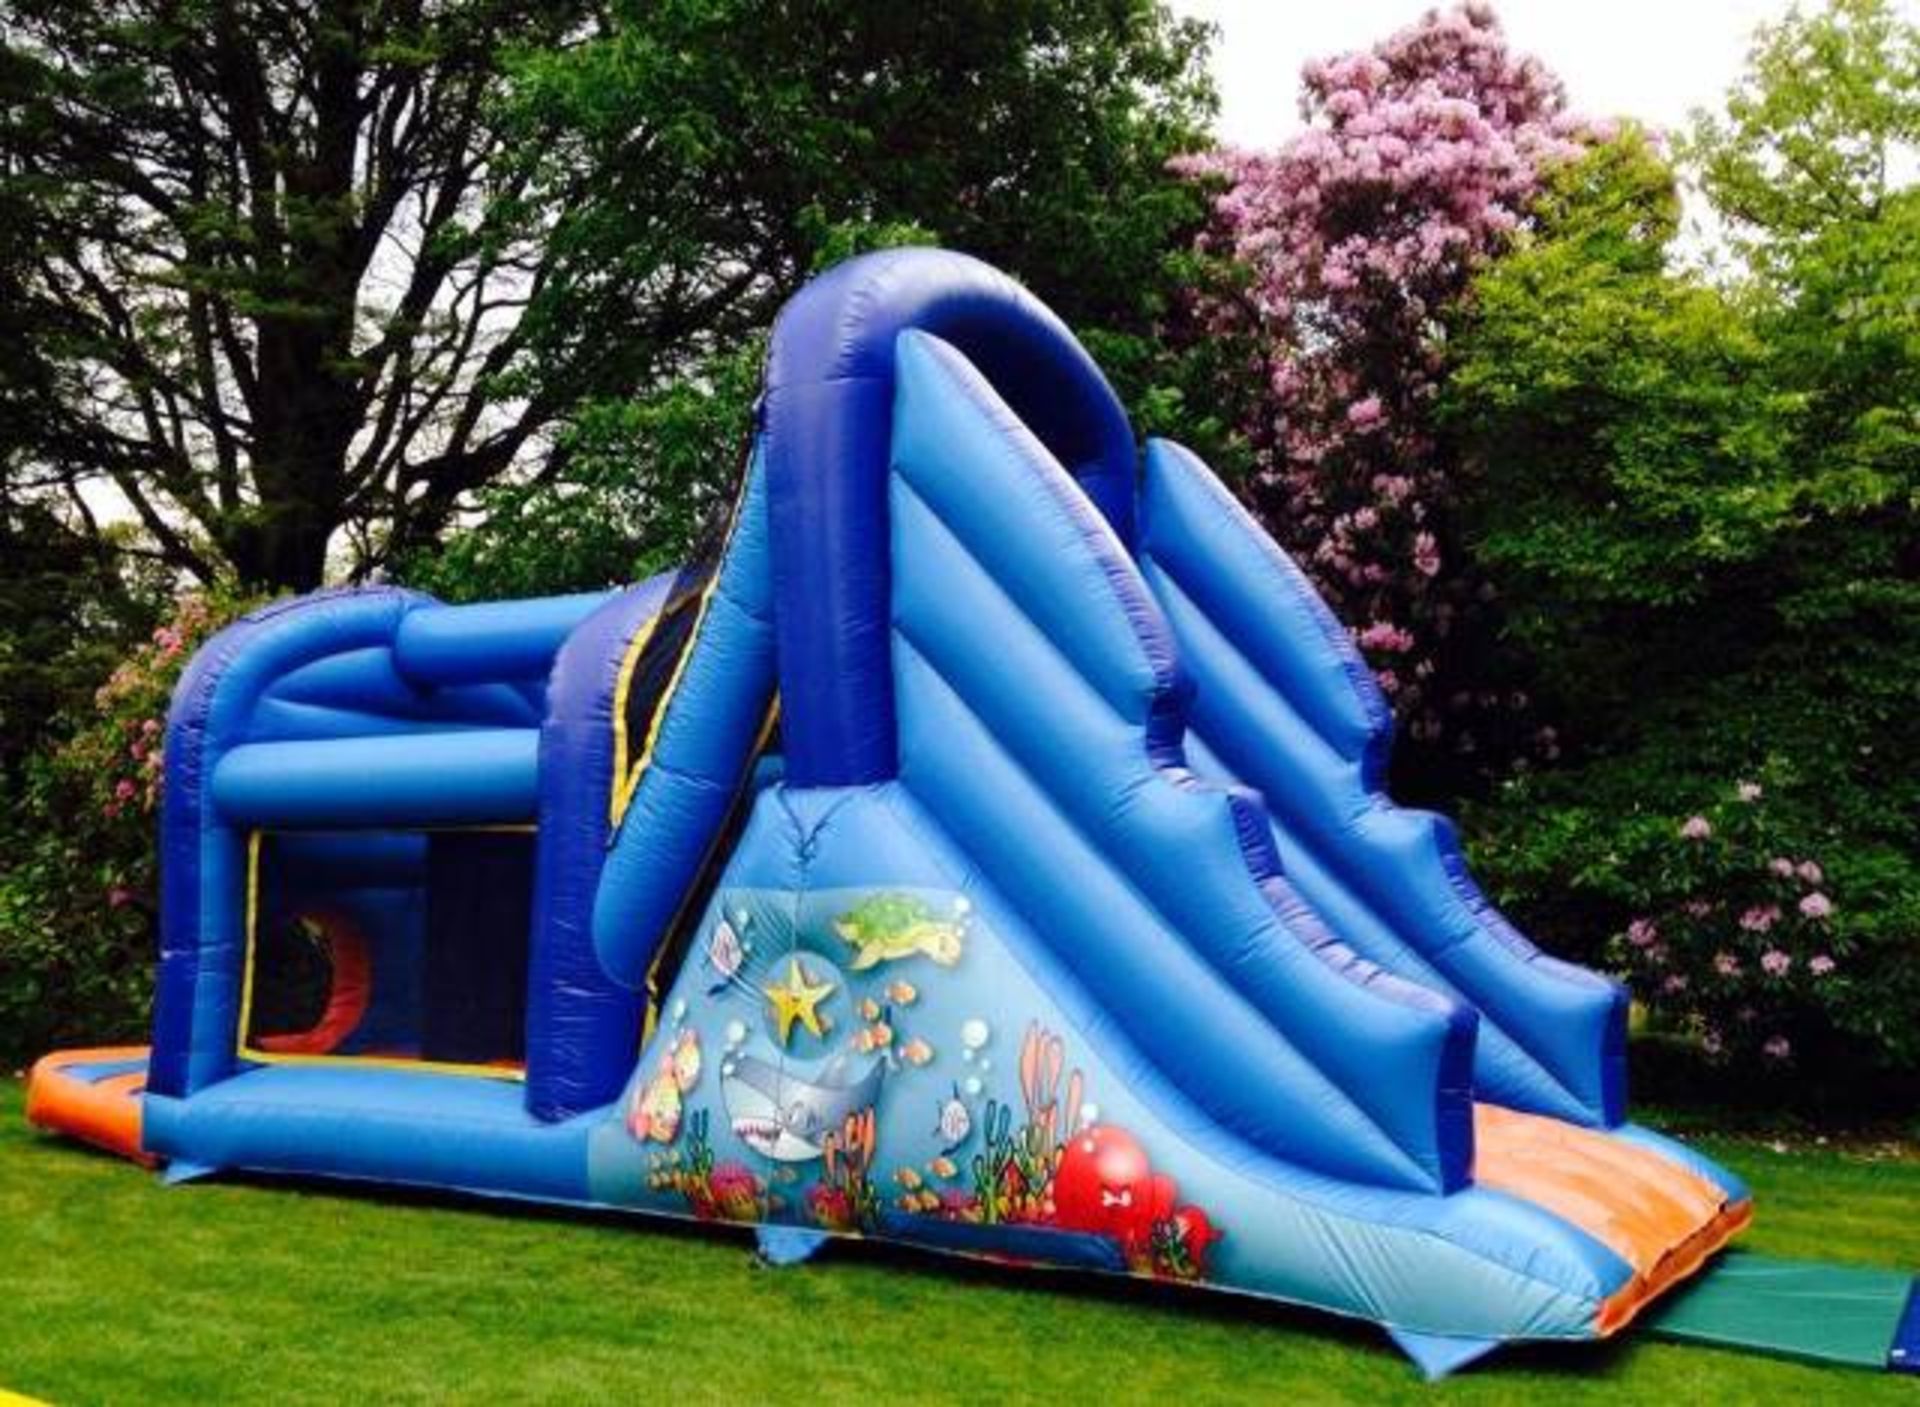 32ft x 15ft Inflatable Assault Course - Image 3 of 10